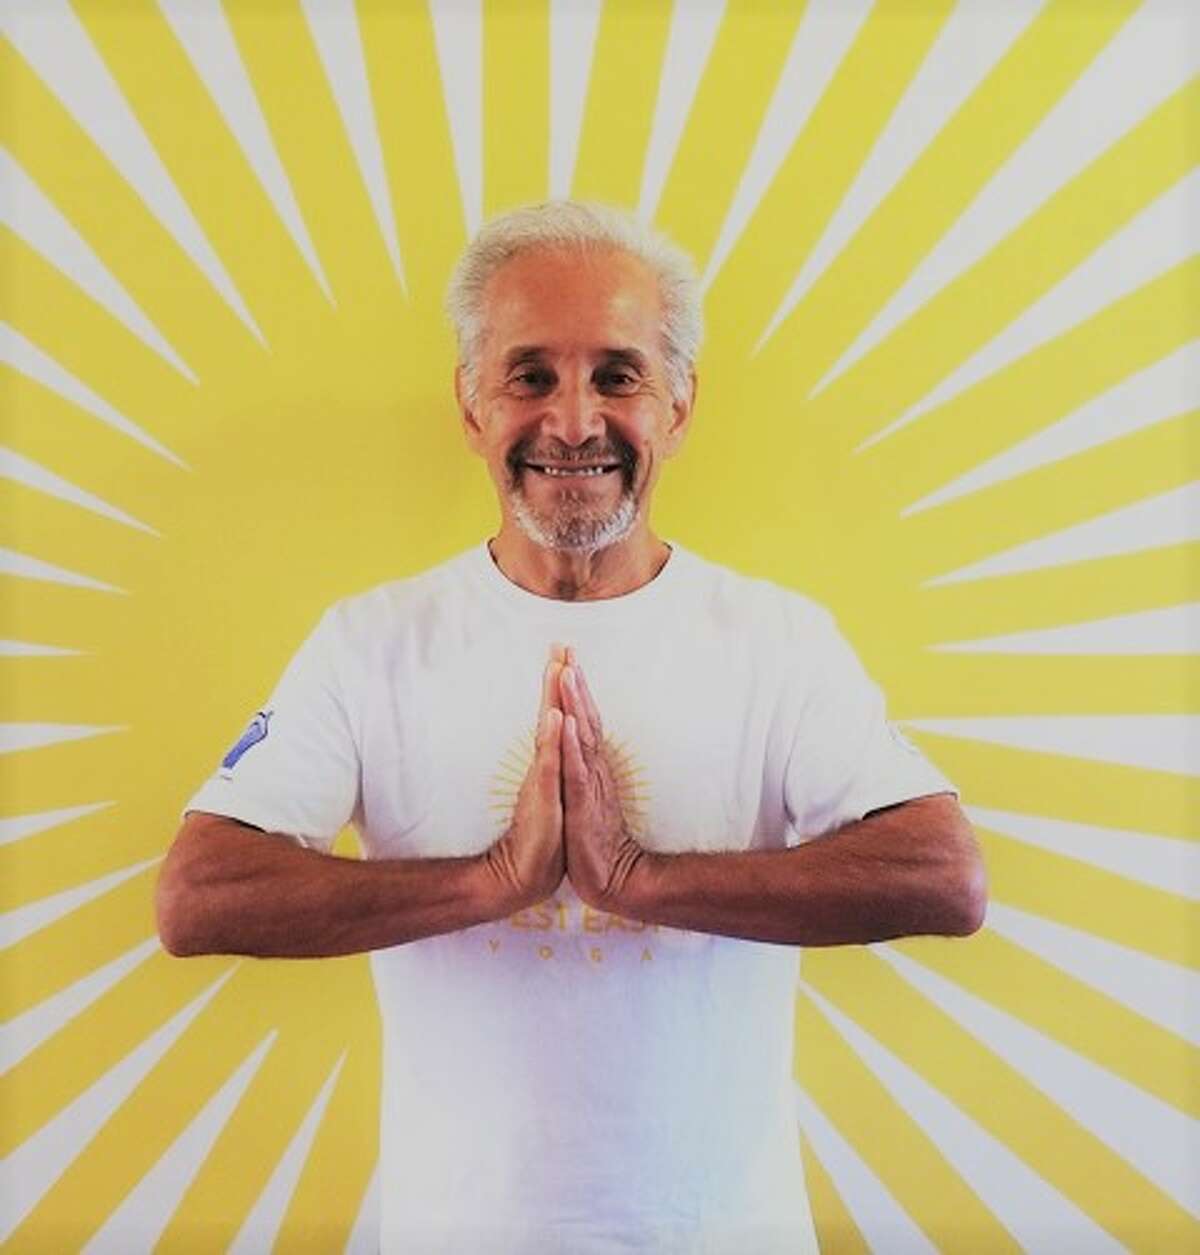 The Jacoby Arts Center, 627 E. Broadway, will host a Winter Solstice Event from 3-5 p.m. Sunday, Dec. 18. Jaime Sanchez (pictured) of West East Yoga will lead the ceremony.